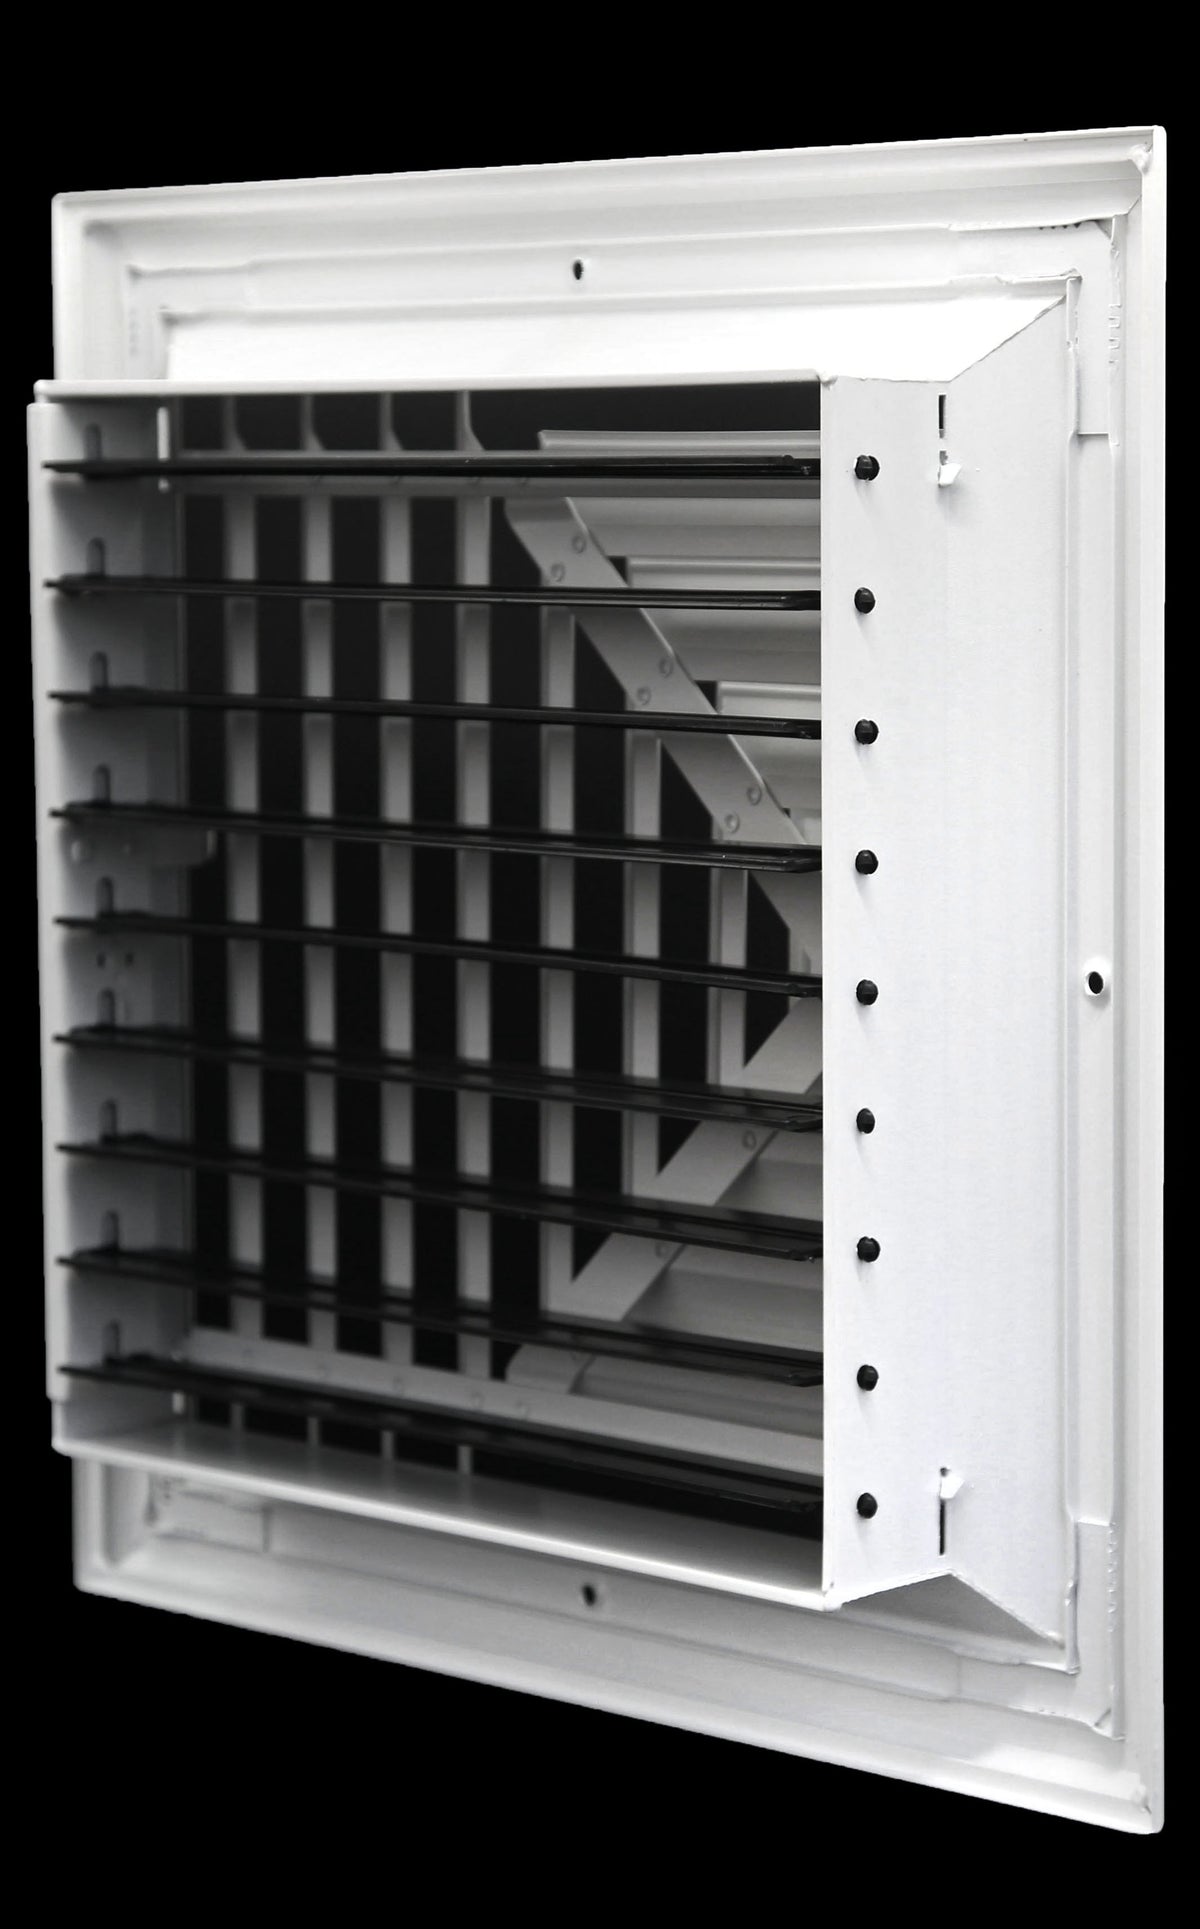 10&quot; x 10&quot; 2-WAY ALUMINUM BAR CEILING DIFFUSER - Vent Duct Cover - With Opposing Dampers via Lever Control